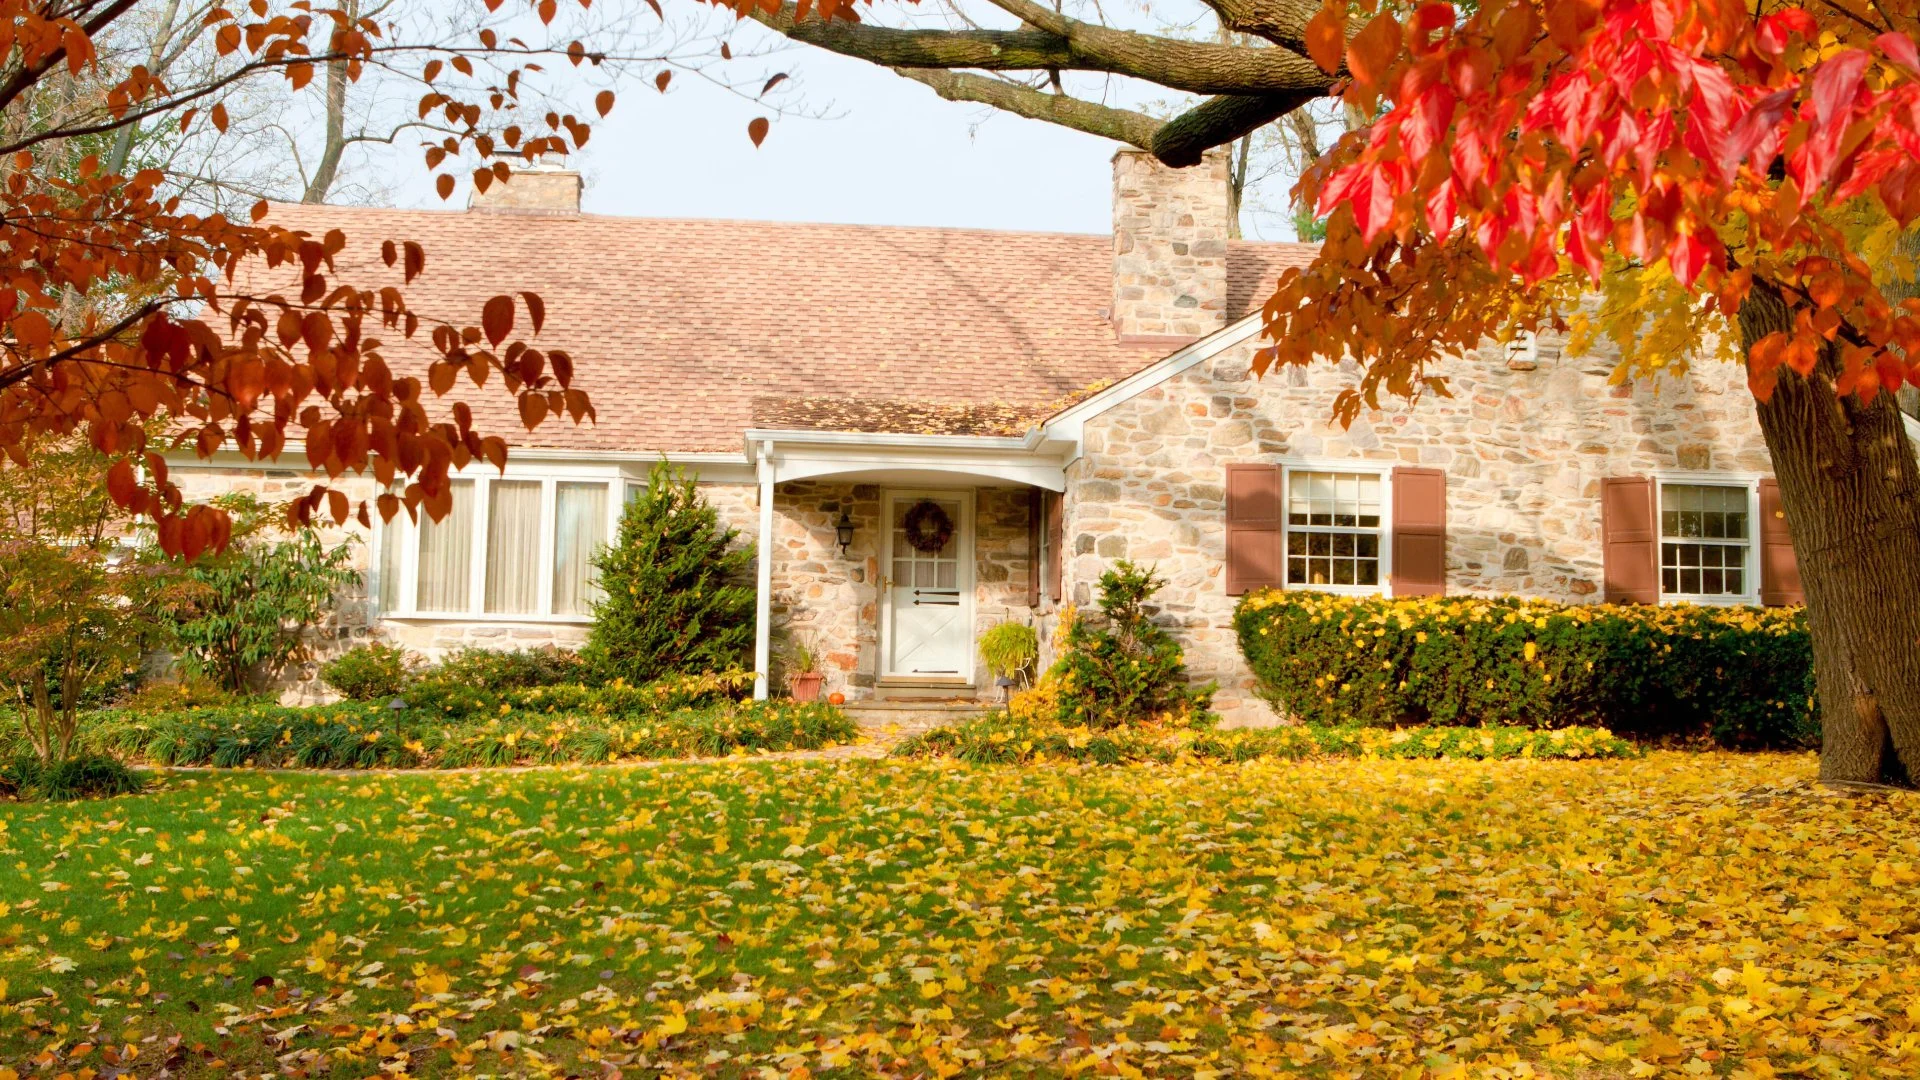 Should You Keep Fall Leaves on Your Lawn or Remove Them?